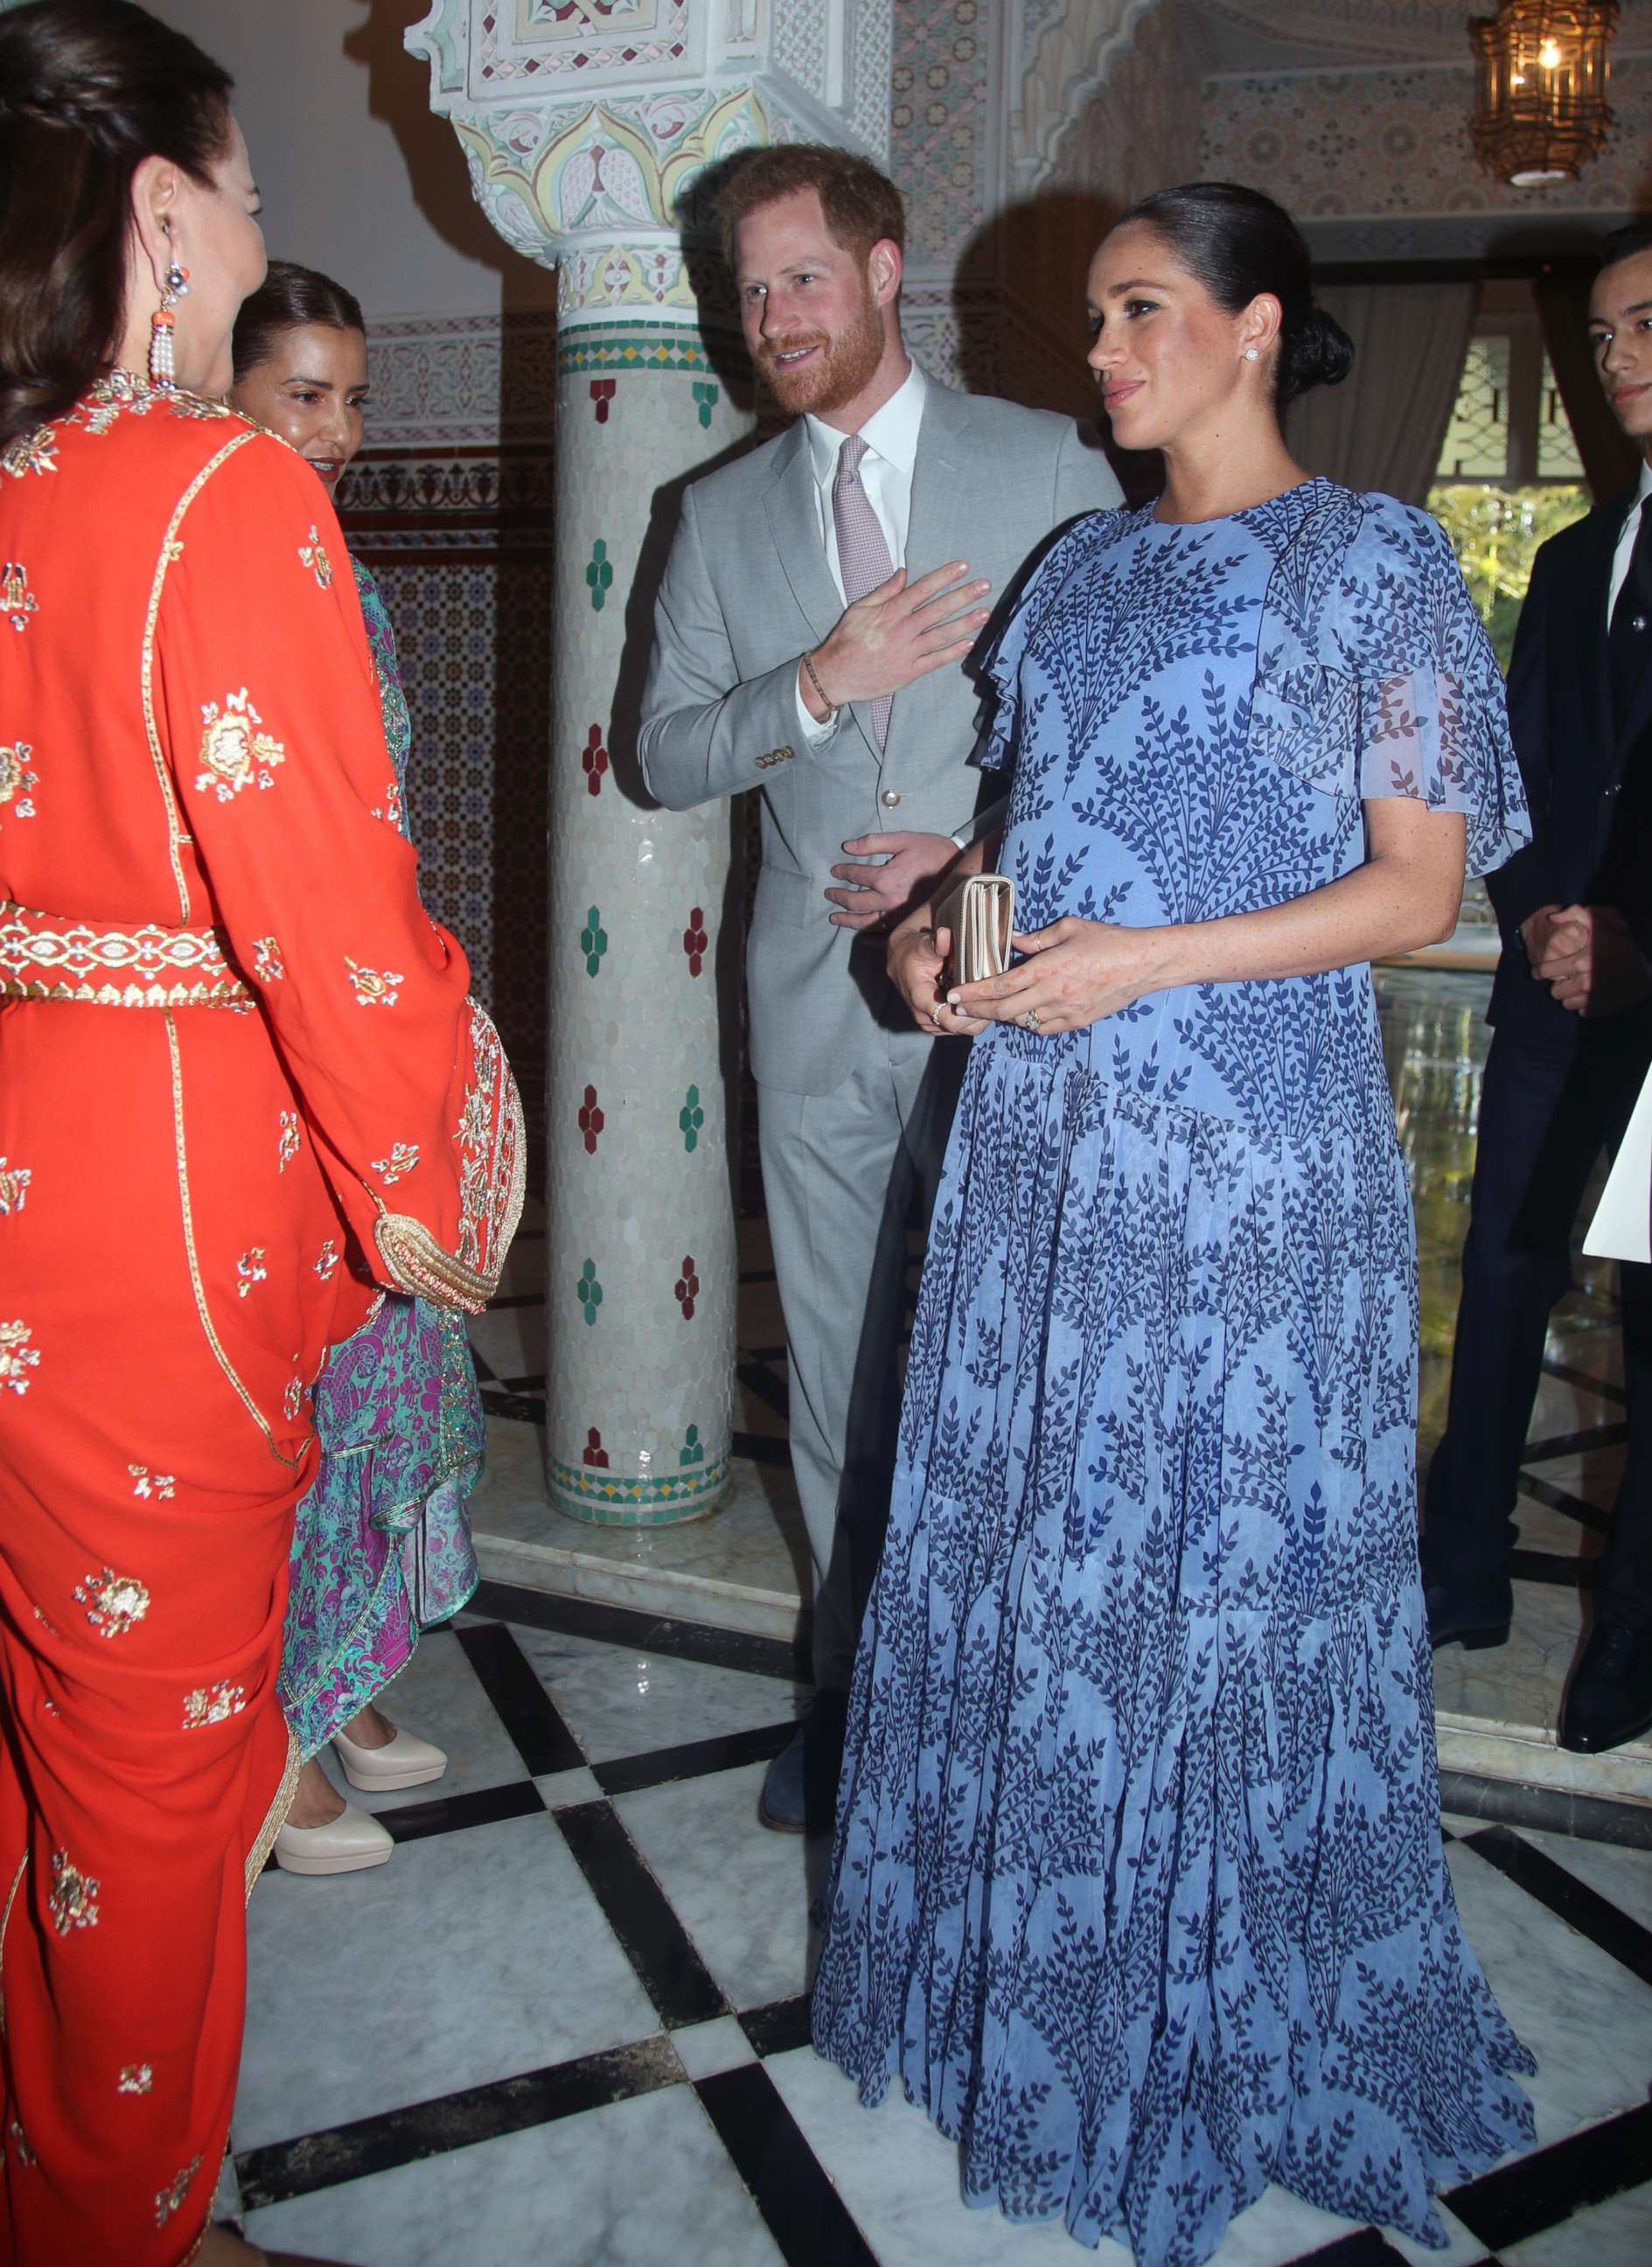 PHOTO: Meghan, Duchess of Sussex, and her husband, Prince Harry, greet Princess Lalla Meryem and Princess Lalla Hasna of Morocco during an audience with the King Mohammed VI of Morocco at his residence on Feb. 25, 2019 in Rabat, Morocco.